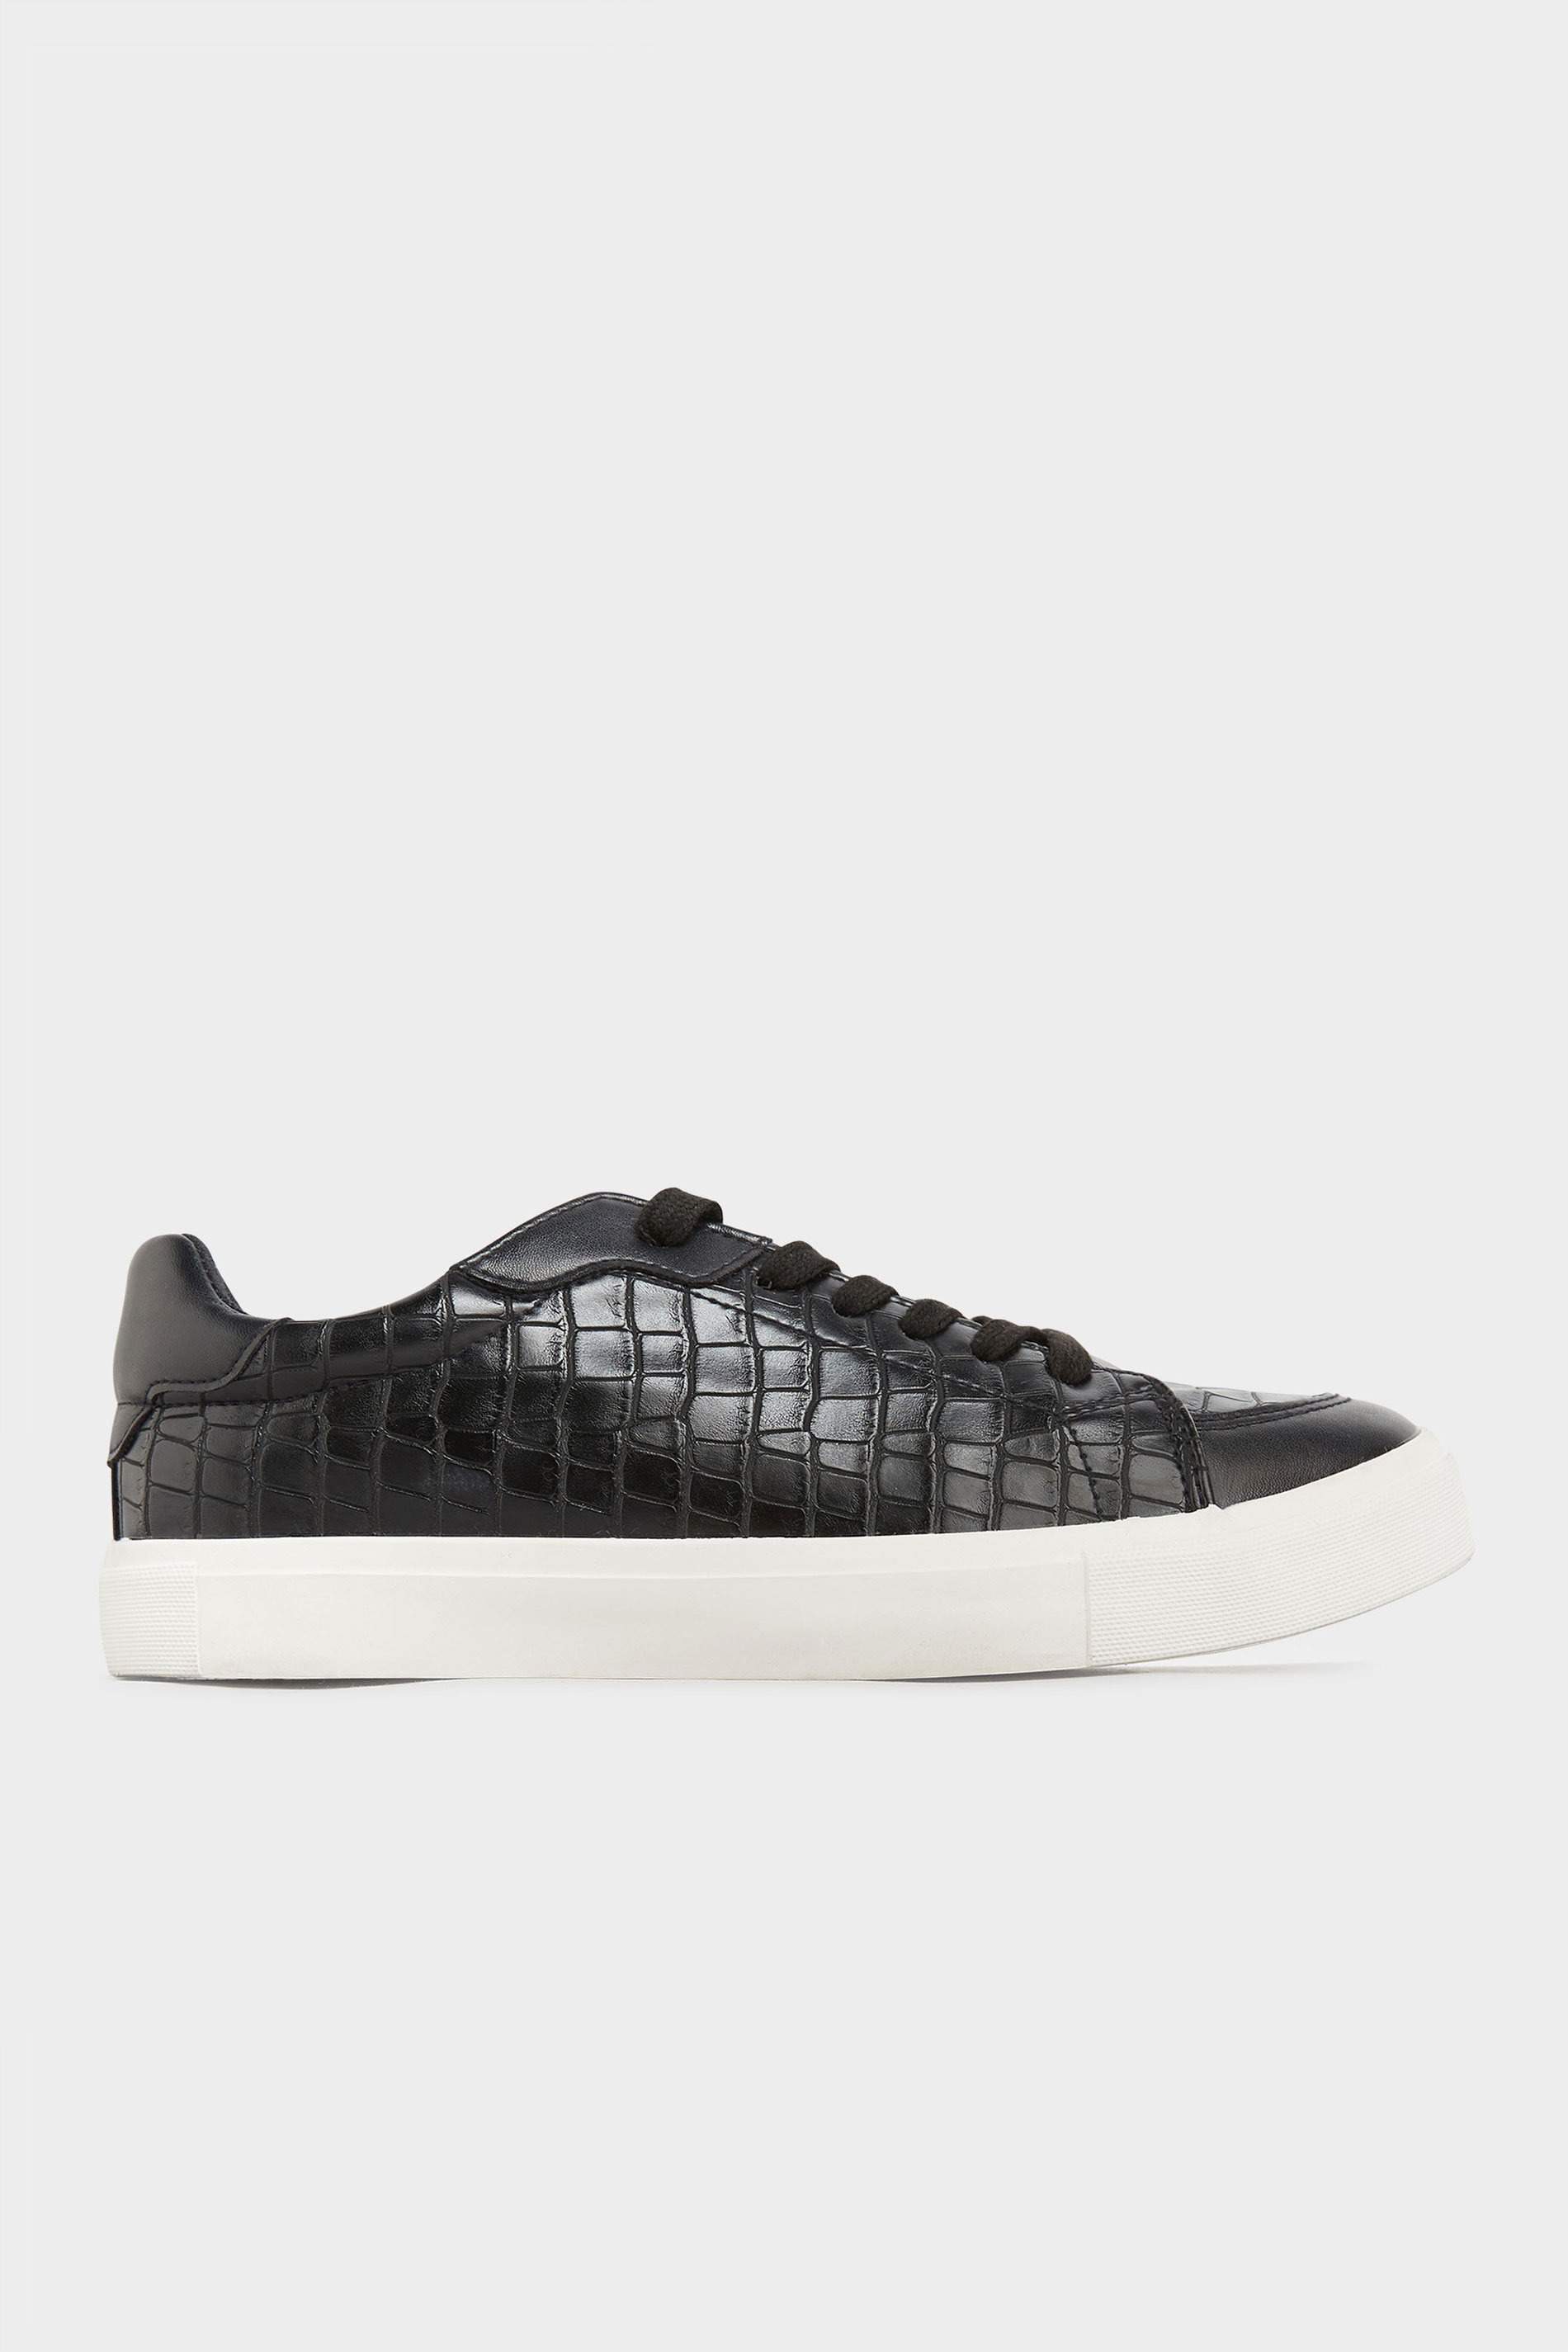 Grande taille  Trainers Grande taille  Slip On Trainers | LTS Black Croc Lace Up Trainers In Standard D Fit - CZ39472